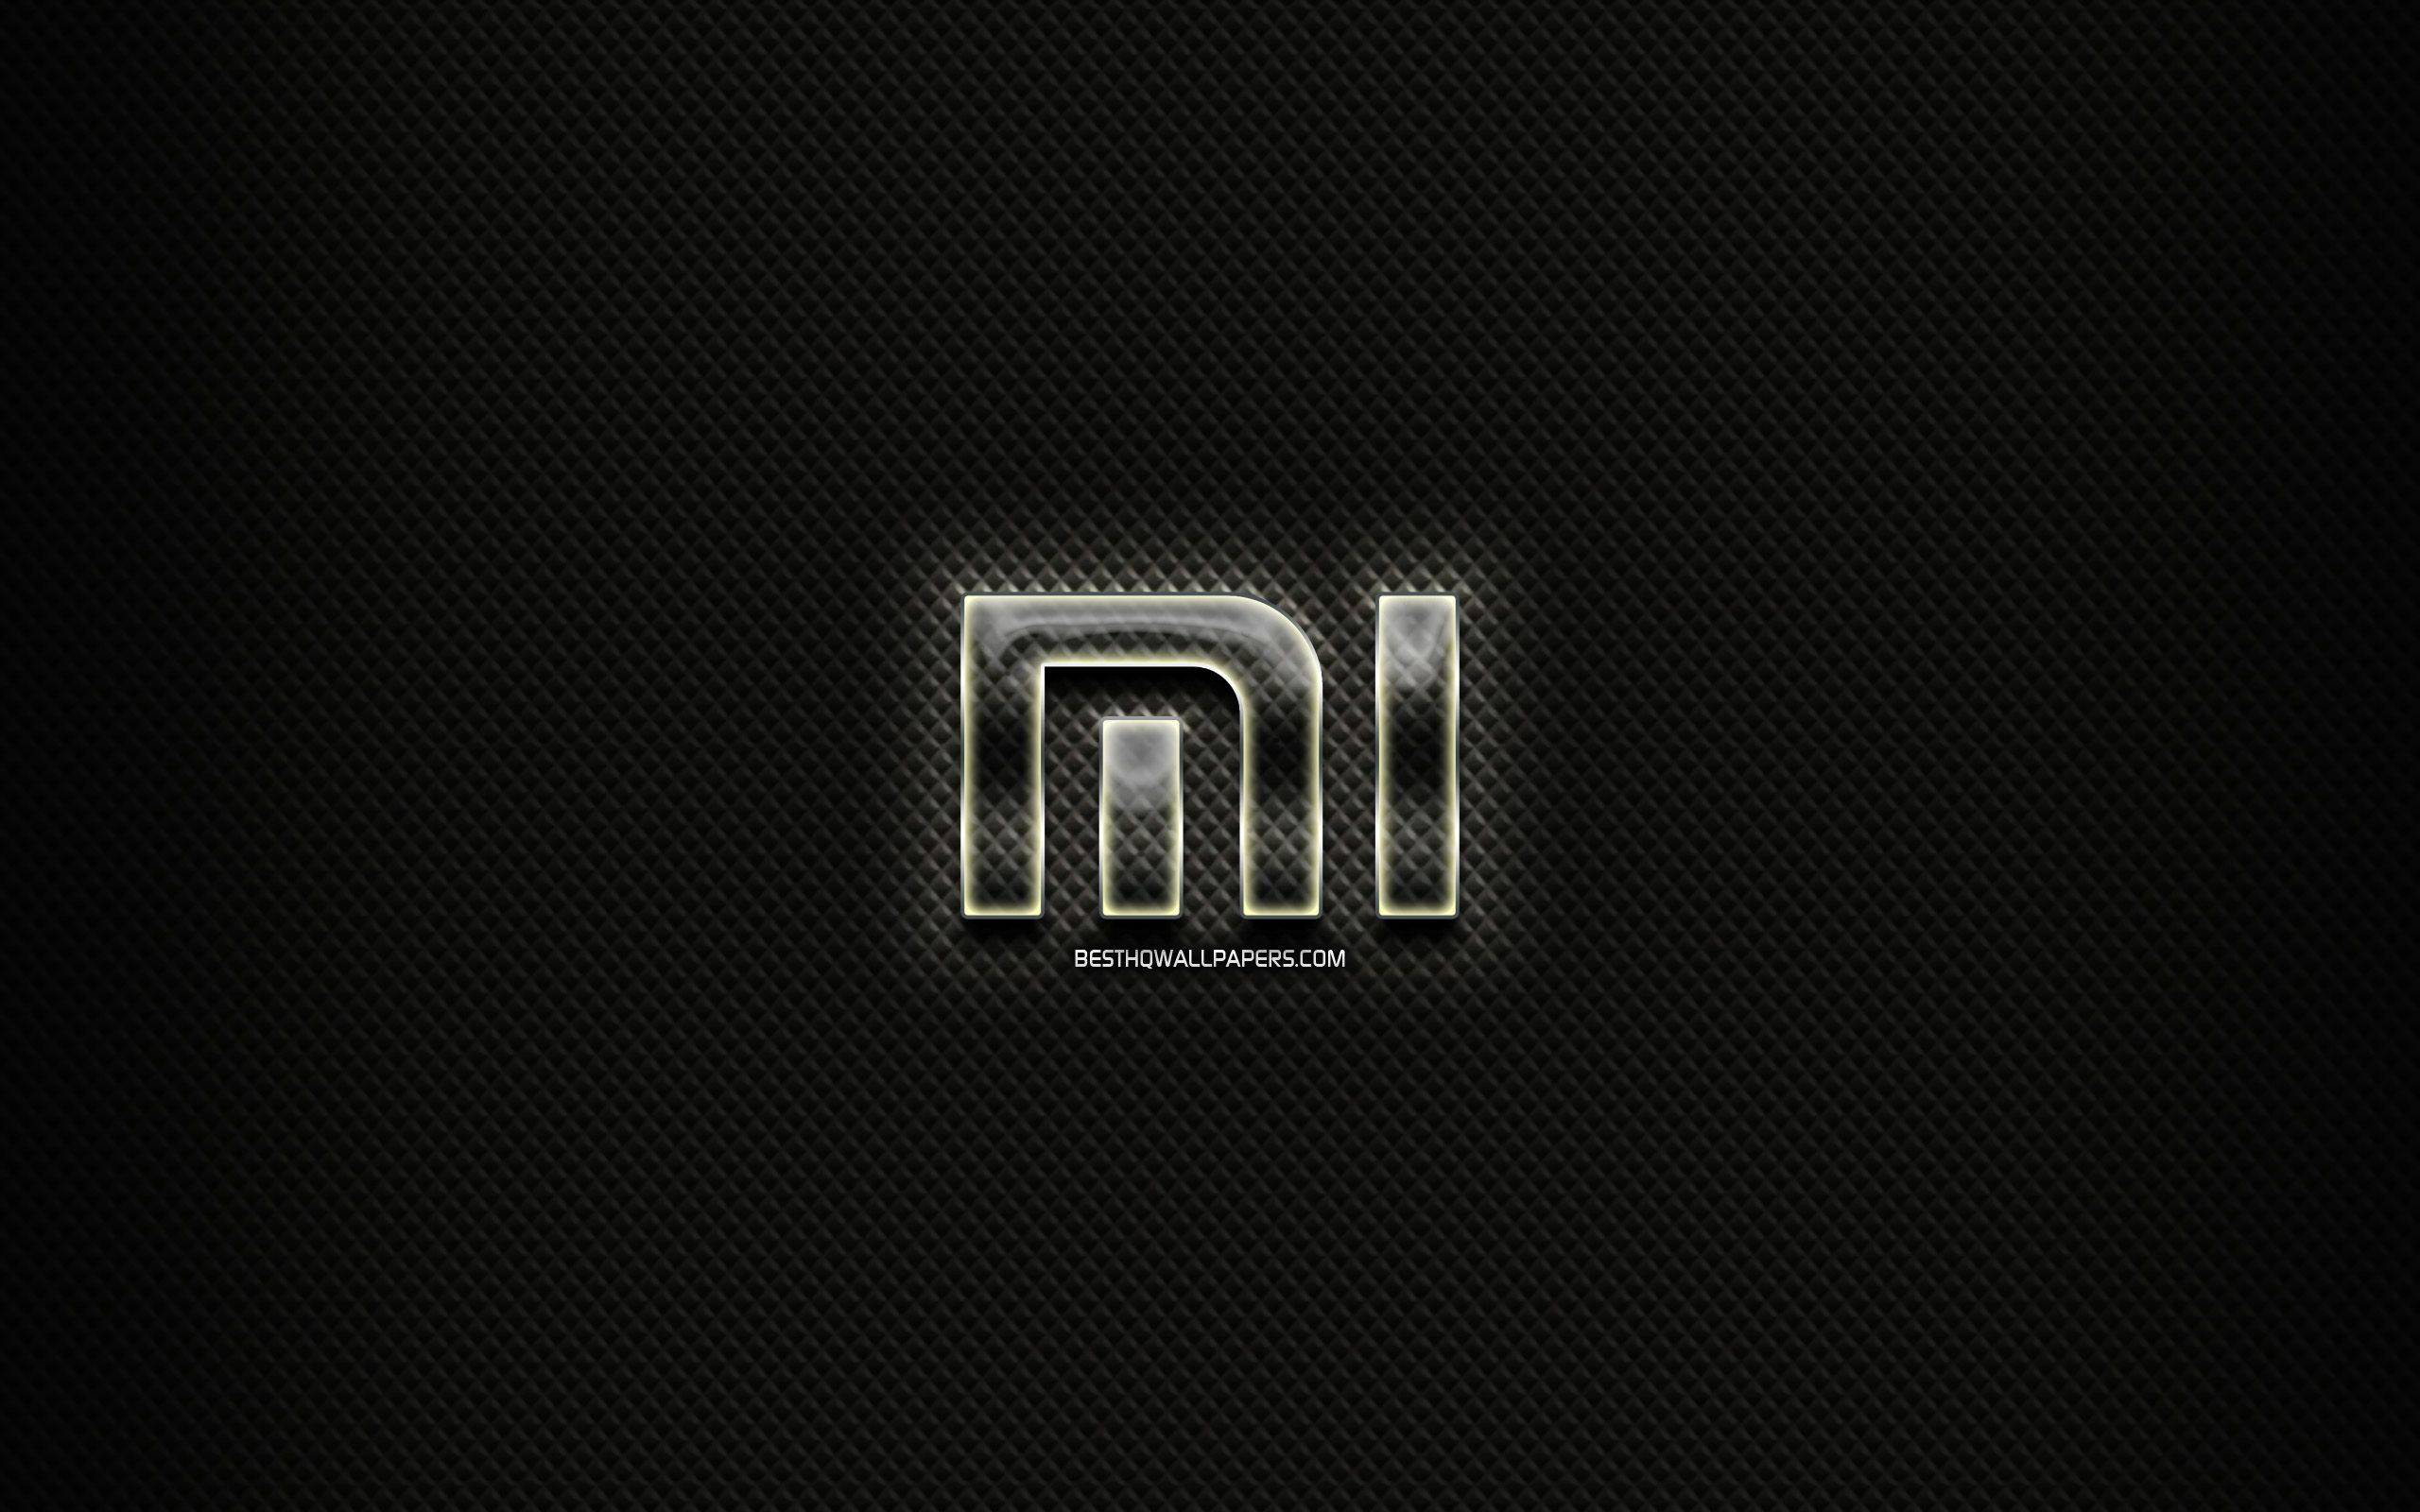 Download official MIUI 10 for Xiaomi Mi Note 3, Note 4X, Note 5 (Pro), Mi  6, Mi Mix 2, Mix 2S, and more